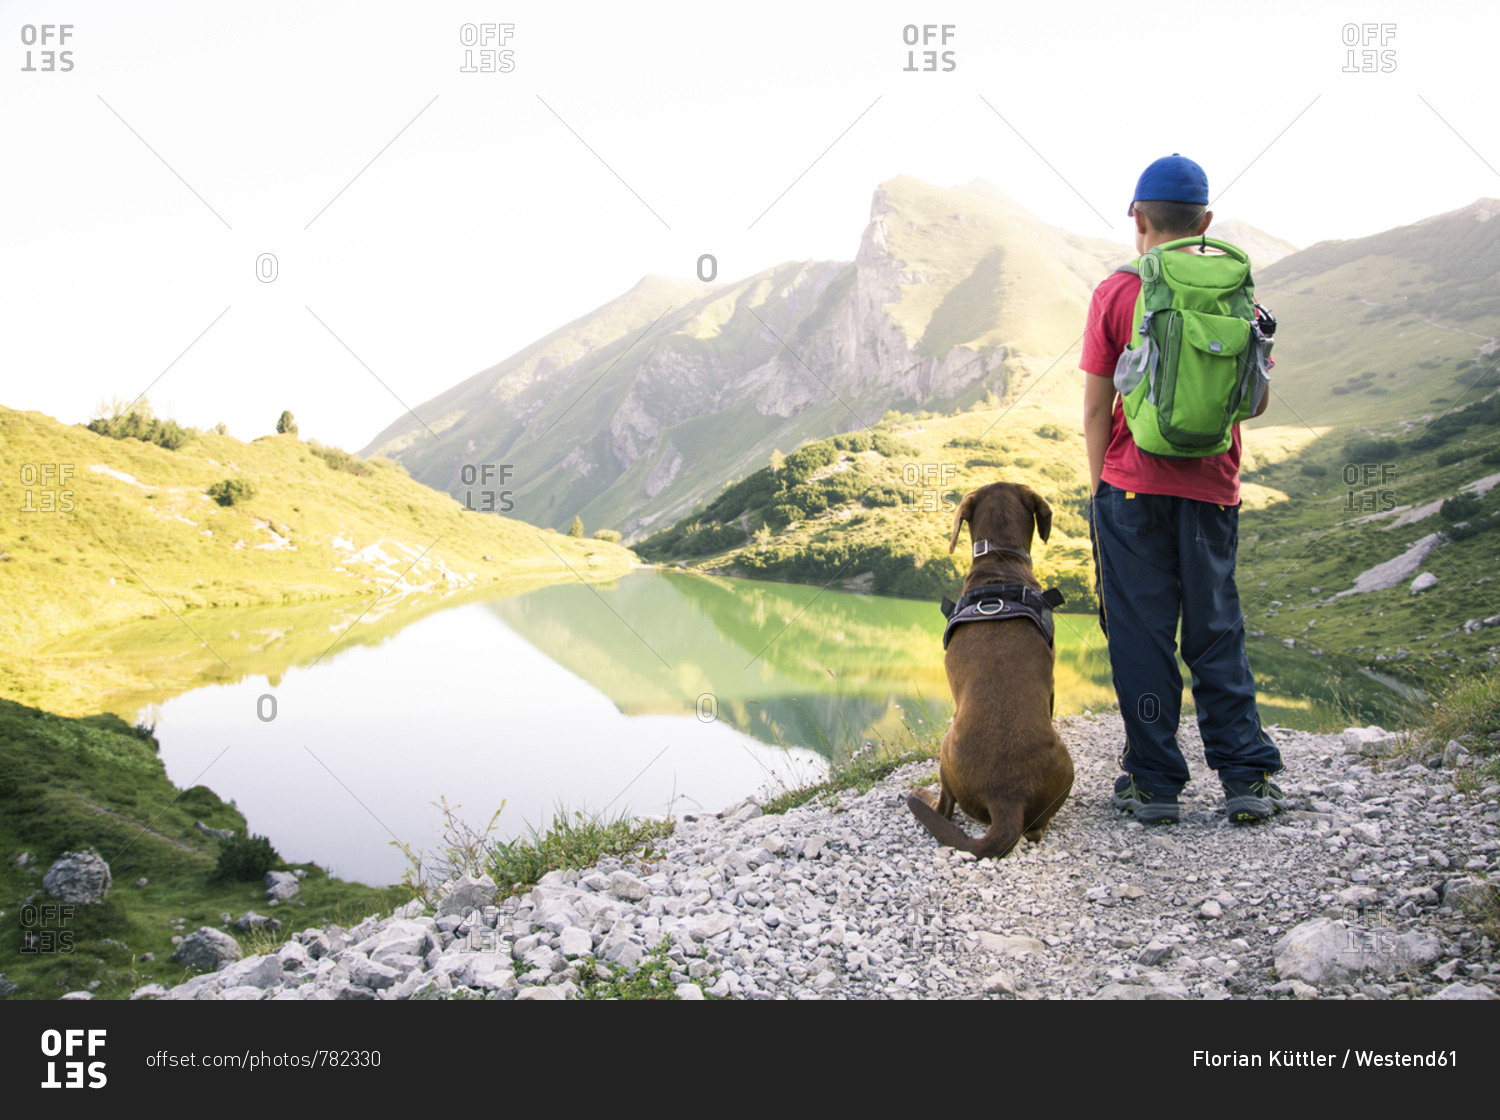 Austria- South Tyrol- young boy standing next to his dog